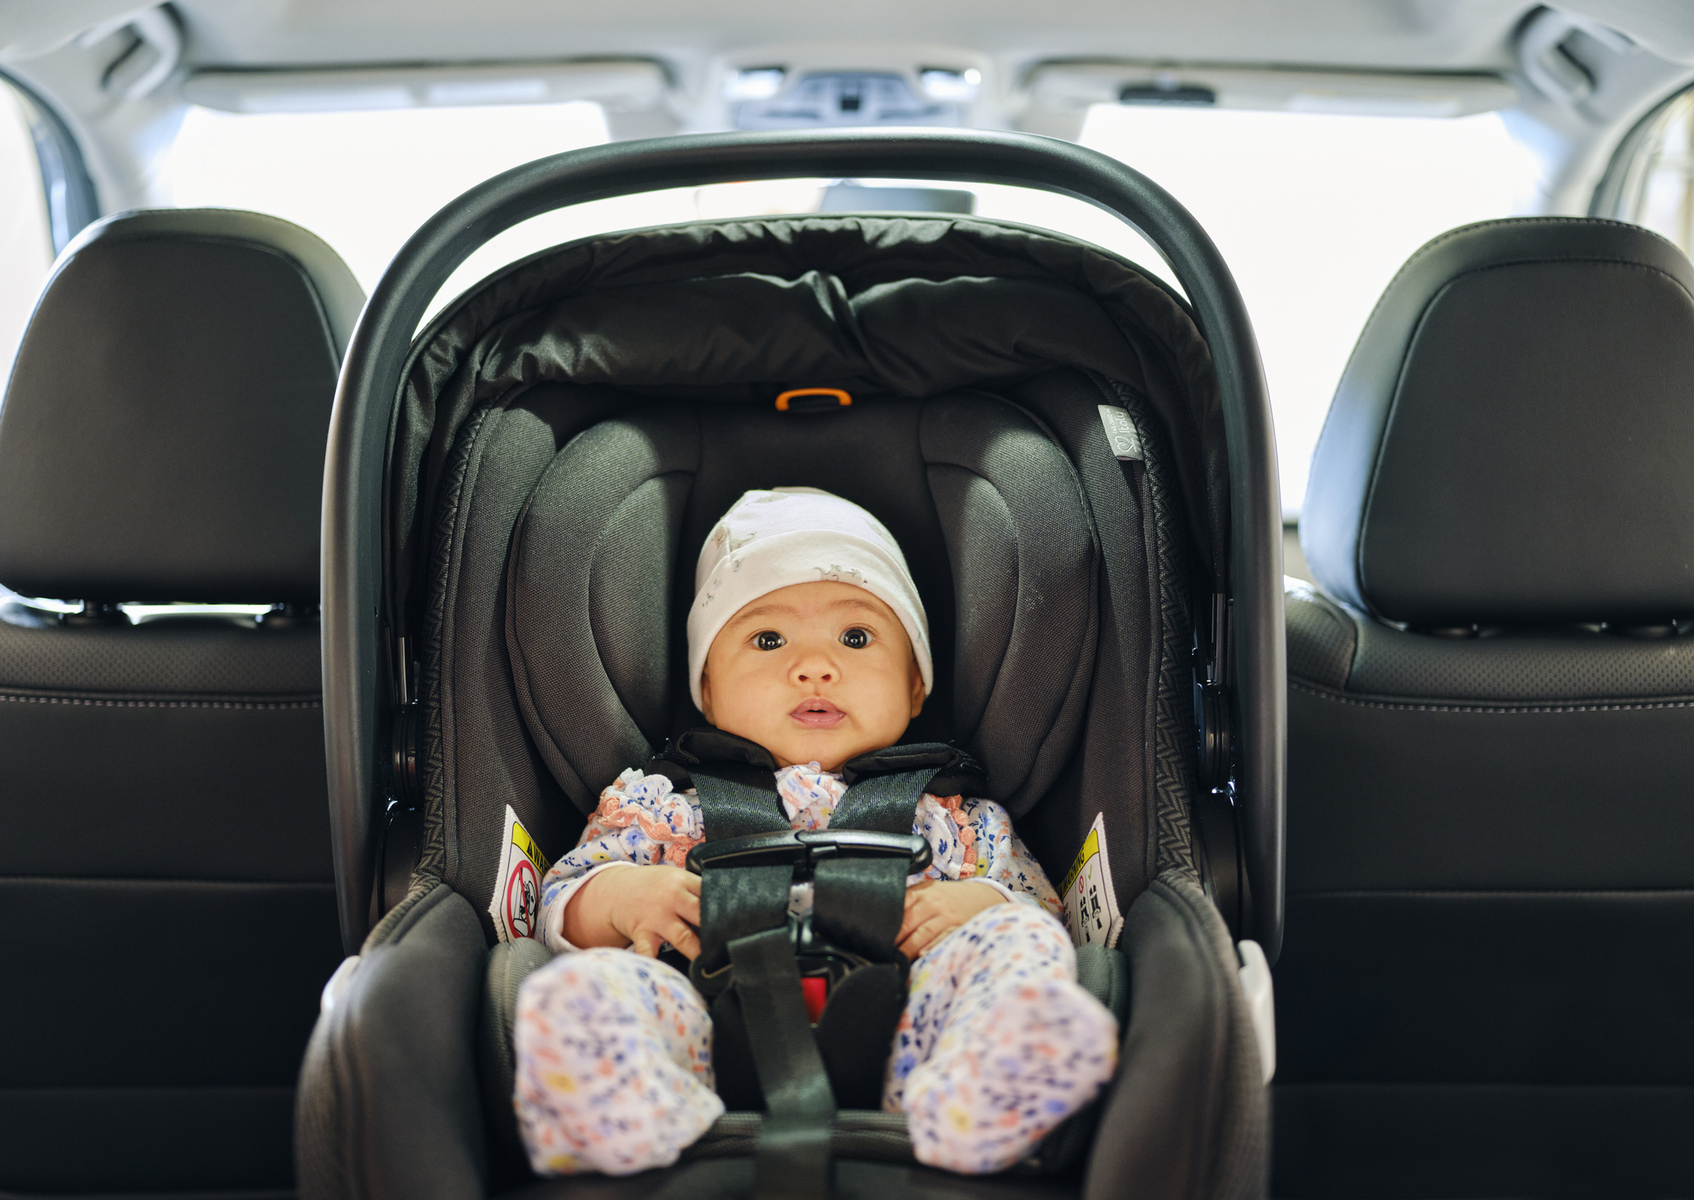 https://www.vargaslawoffice.com/wp-content/uploads/2021/04/preview-lightbox-Discover-the-Most-Common-Causes-of-Injuries-Caused-by-Child-Car-Seats.jpeg